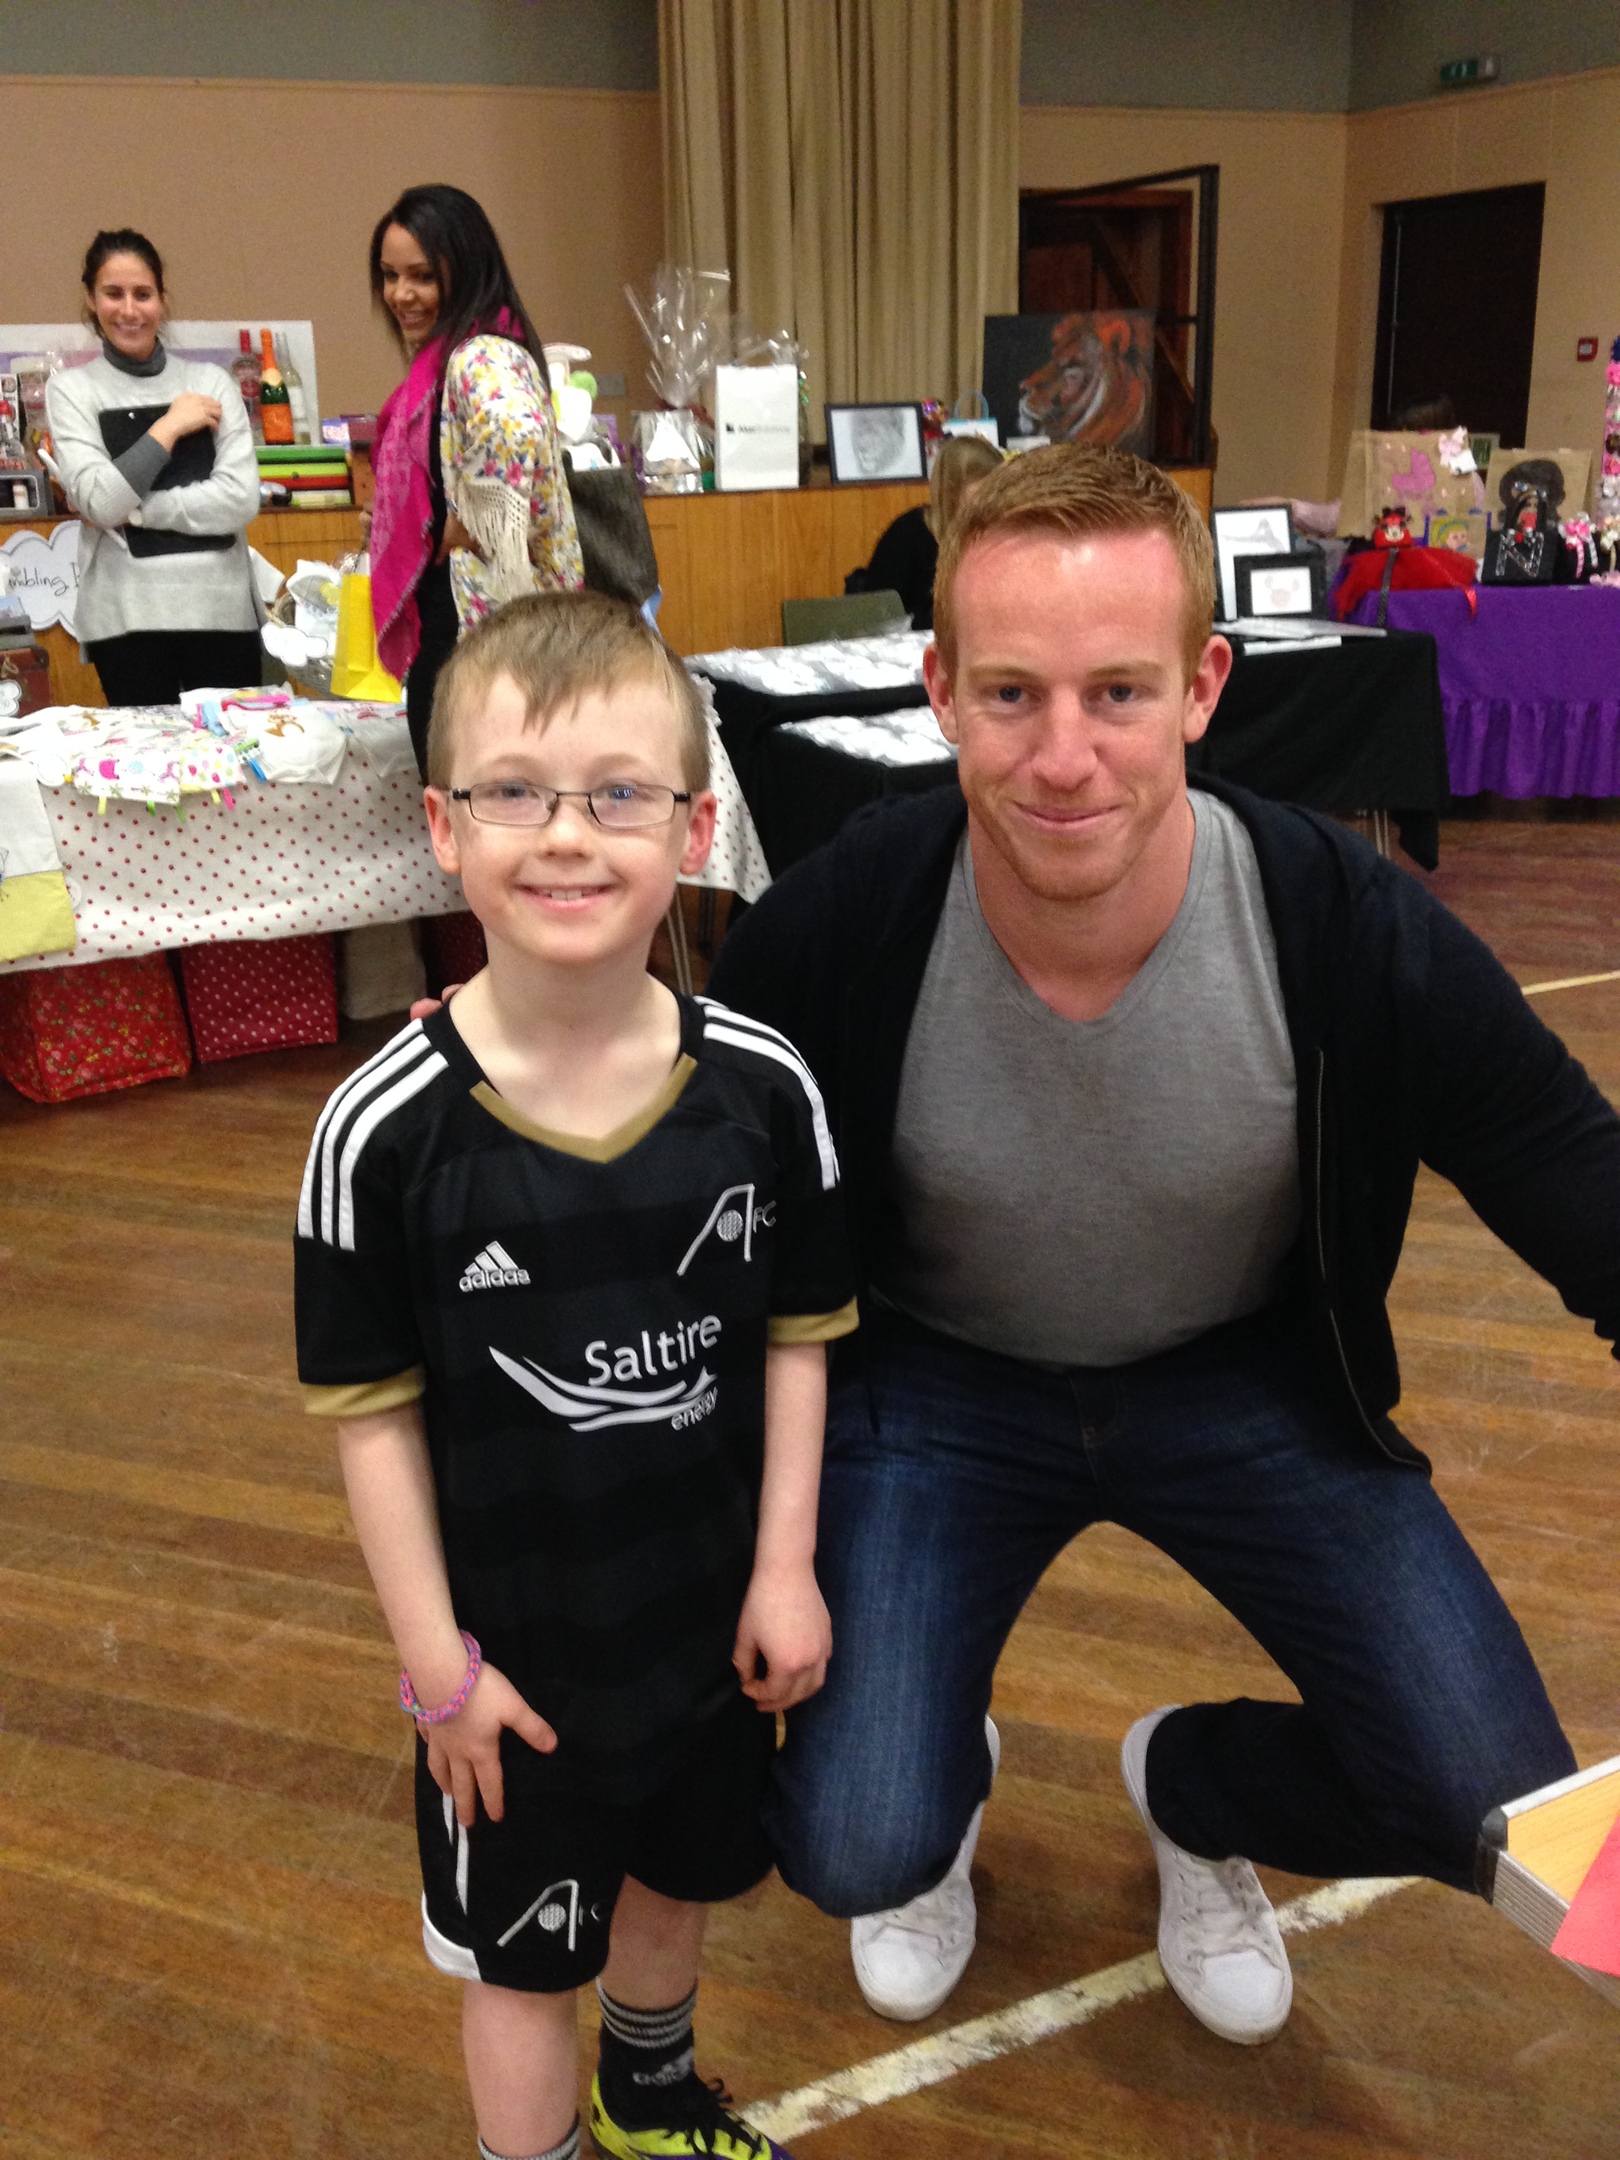 Adam Rooney with a young Dons fan at the fundraising event in Strichen